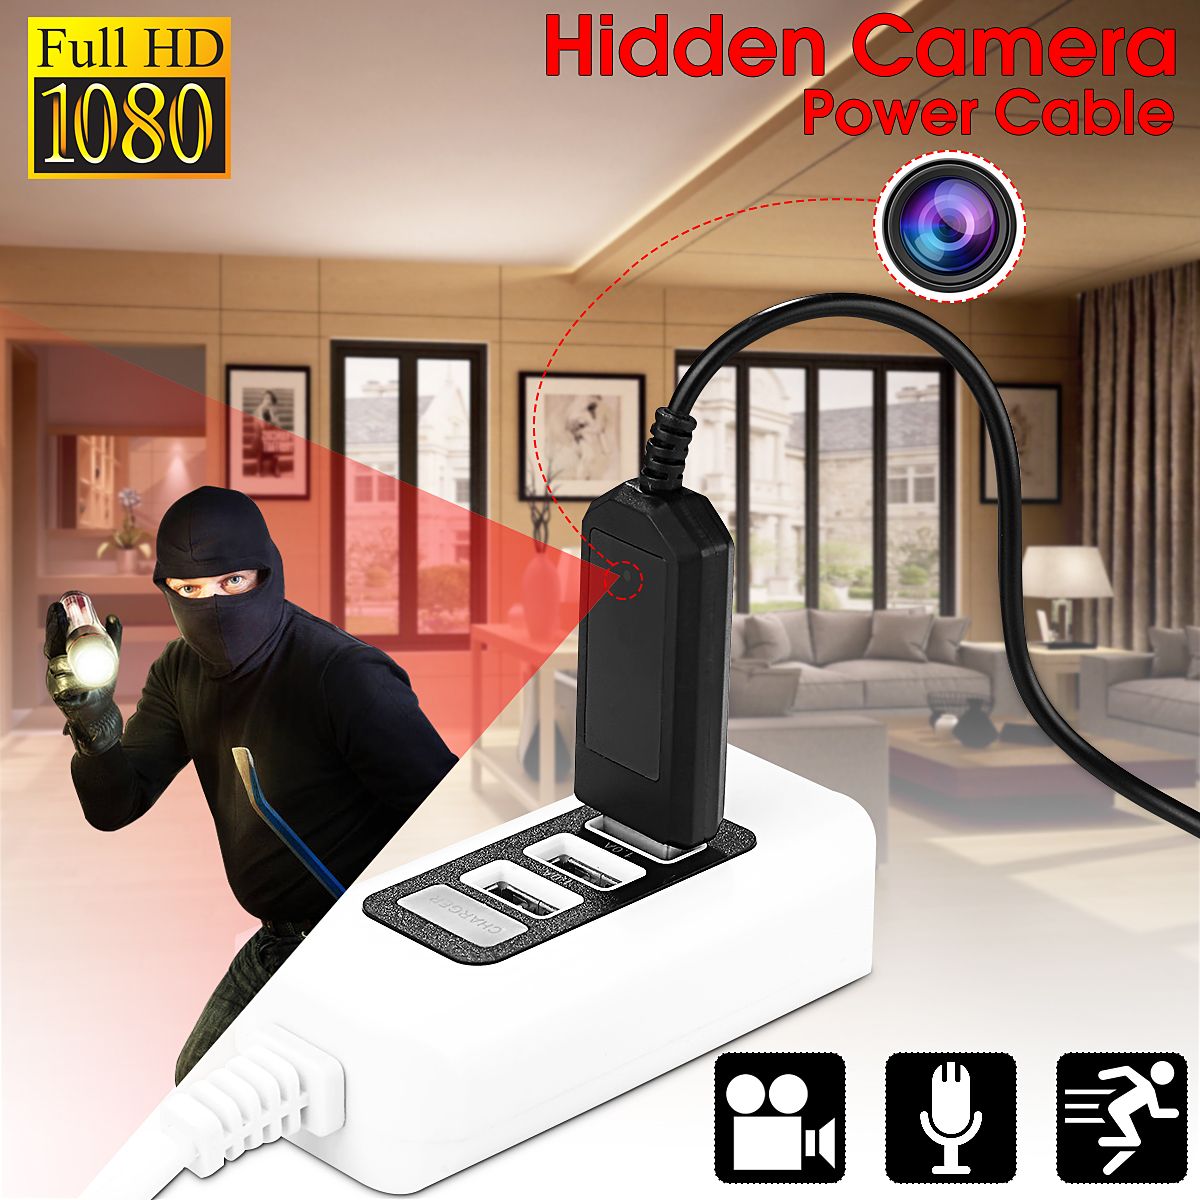 HD-1080P-Hidden-Camera-Phone-Power-Cable-Camera-Audio-DVR-Motion-Detection-for-Android-1237212